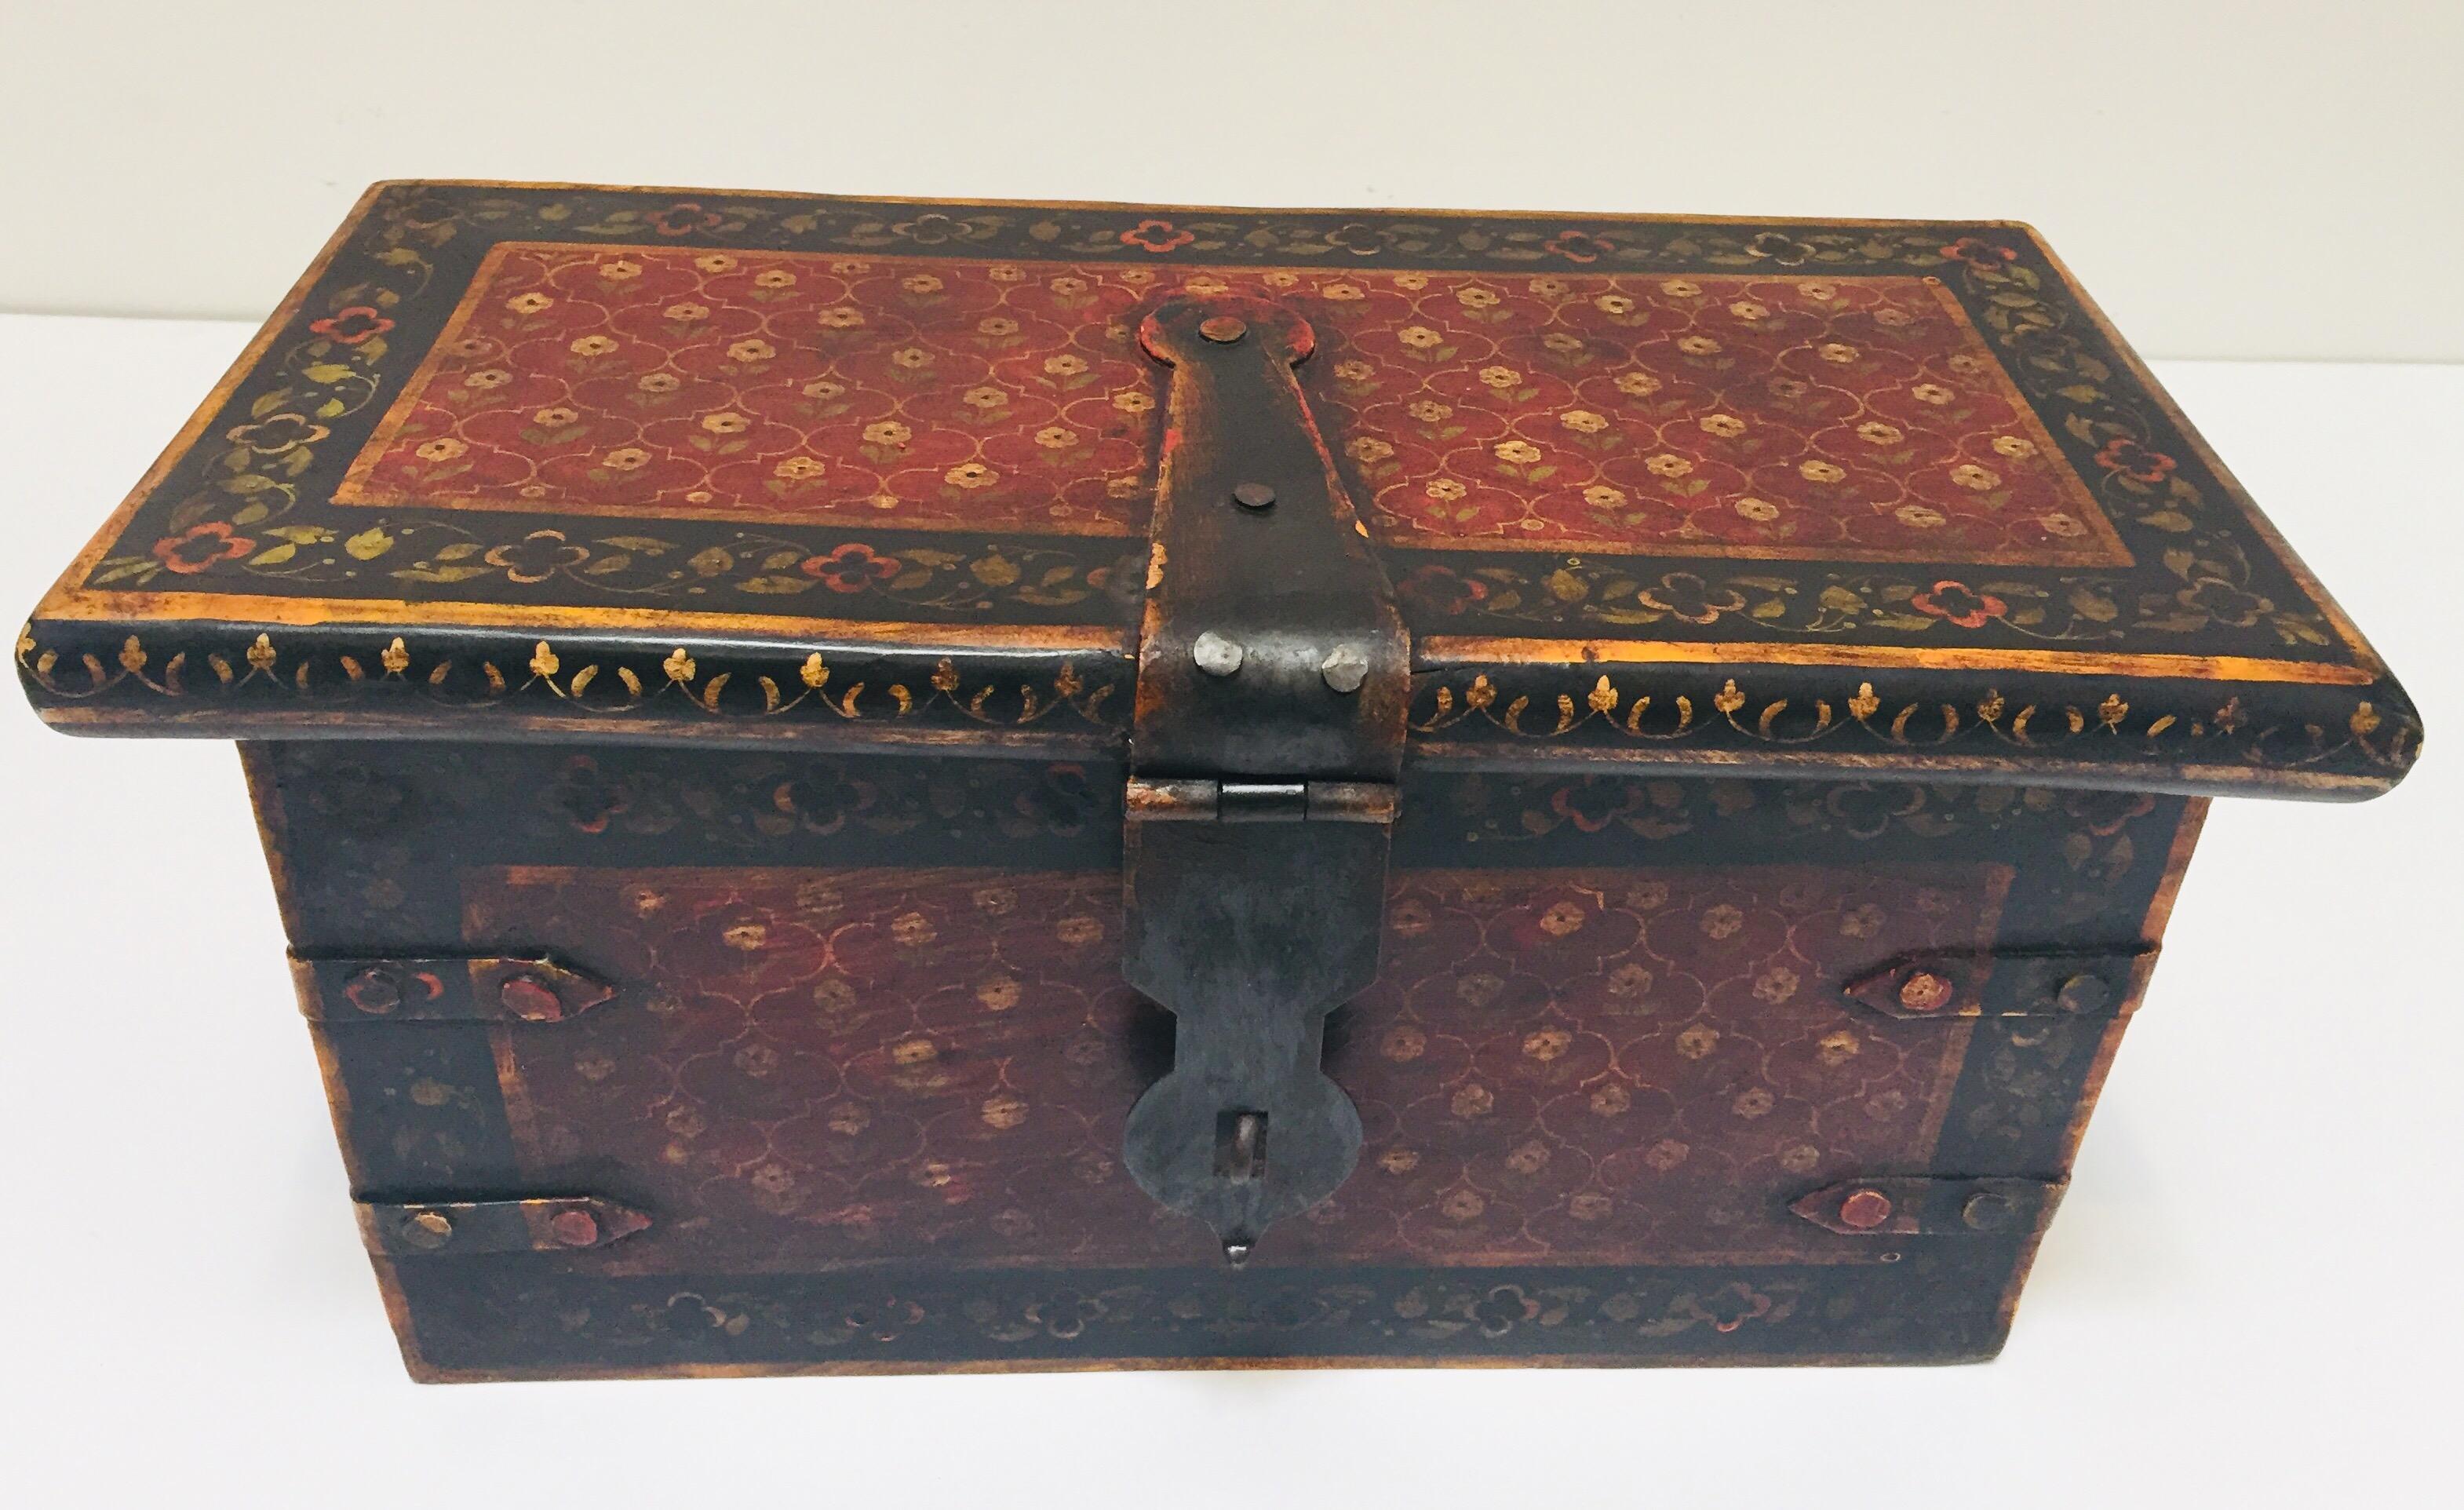 Hand painted Rajasthani large decorative coffer trunk.
Rajasthani Indian hand painted jewelry dowry box.
Hand painted rectangular shape wood box with hinged lid and decorated with floral designs in red and black.
Wrought iron central hasp to open